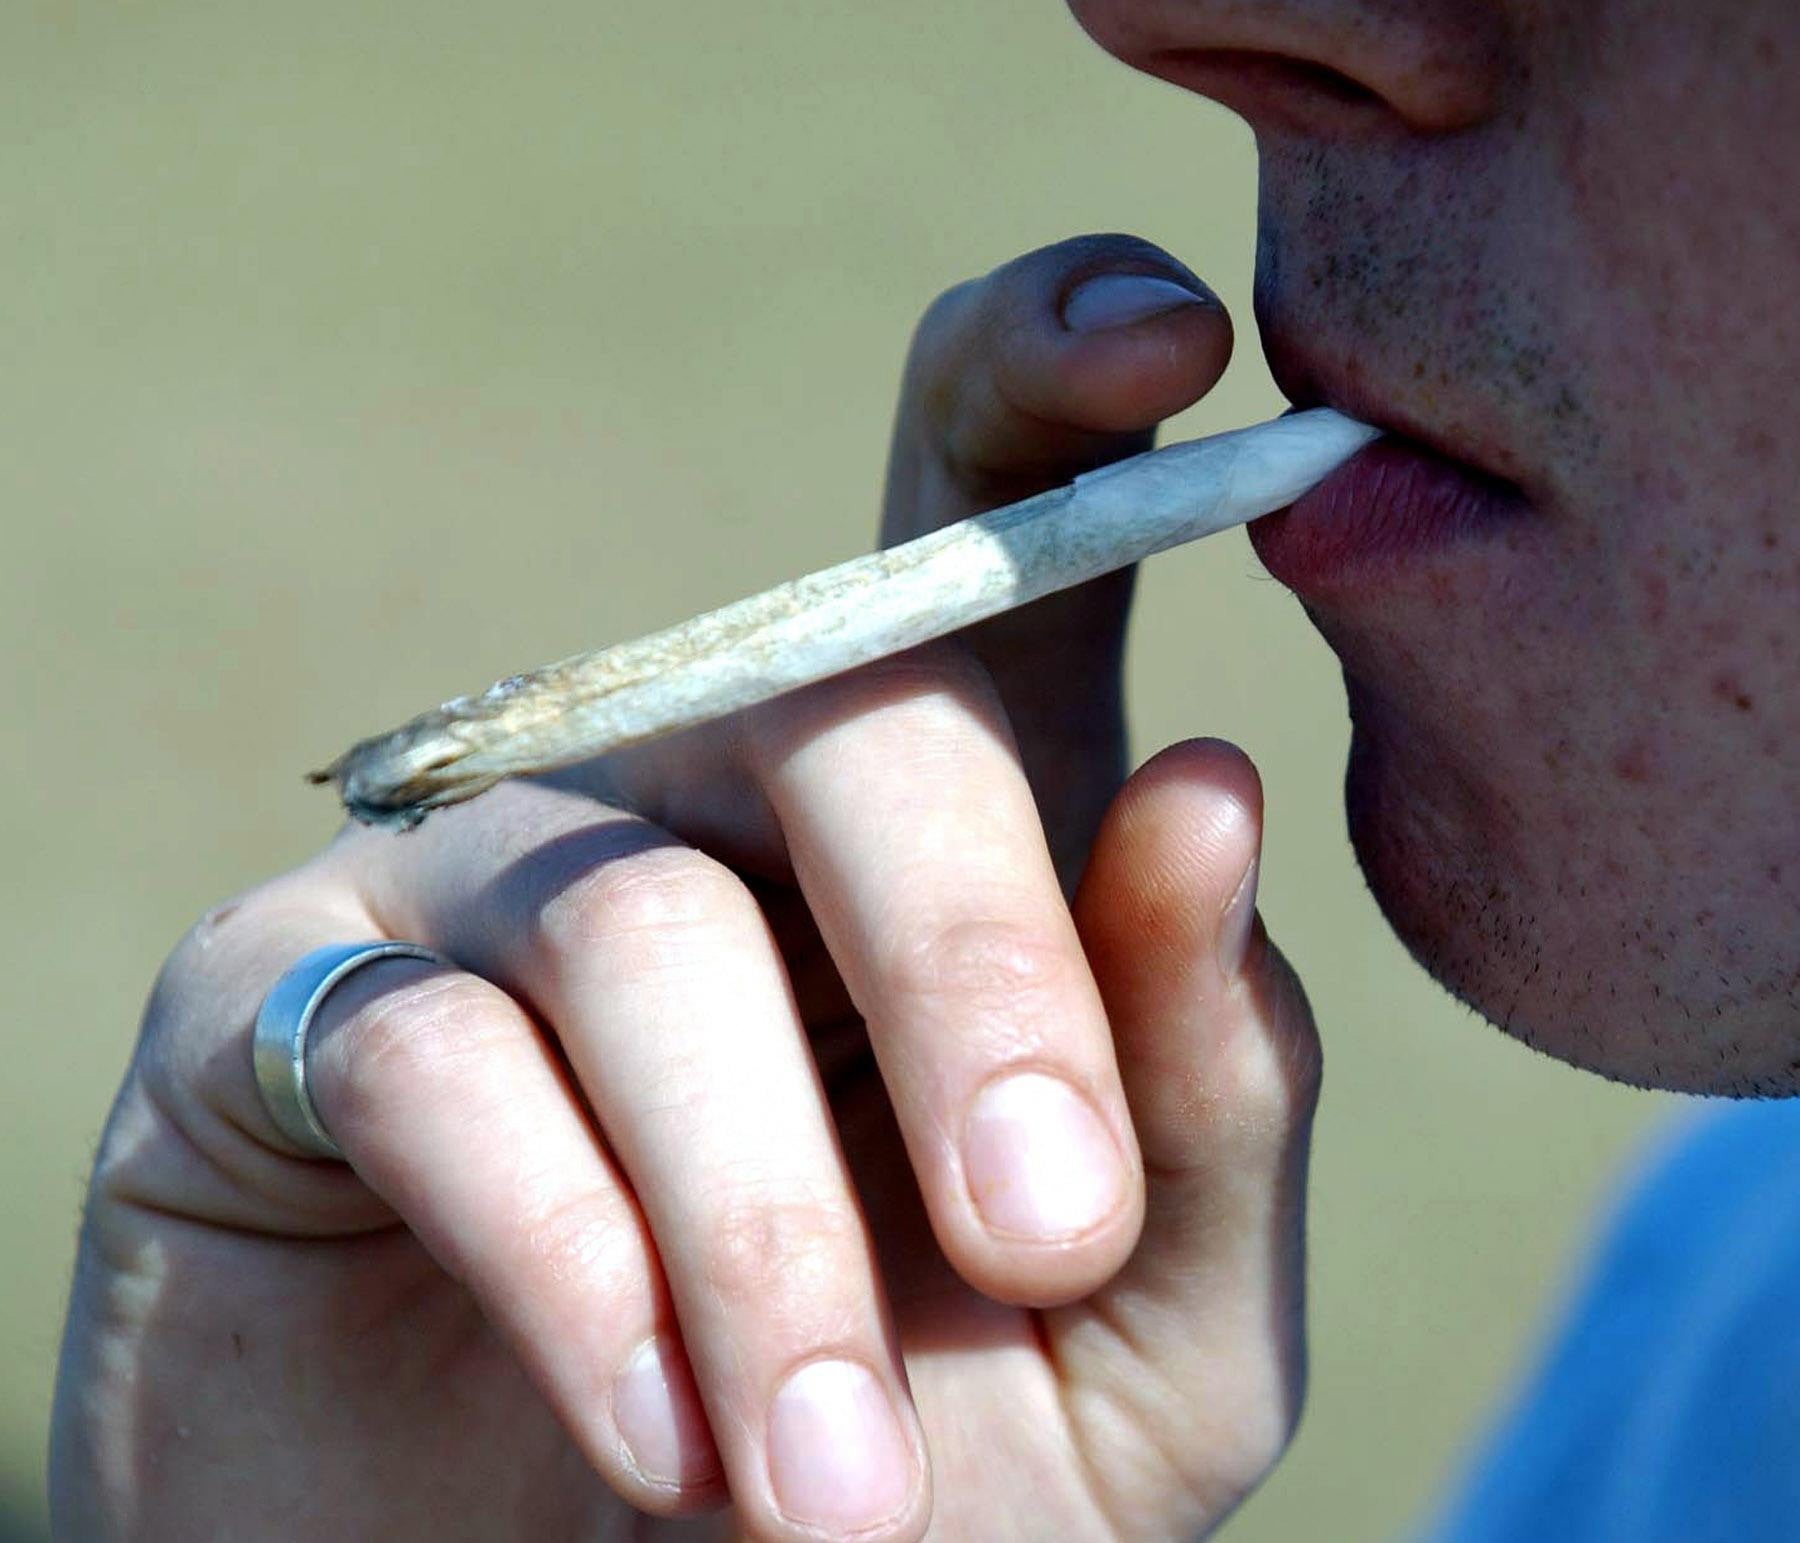 Nearly 20 per cent of young adults have used cannabis, according to the ONS